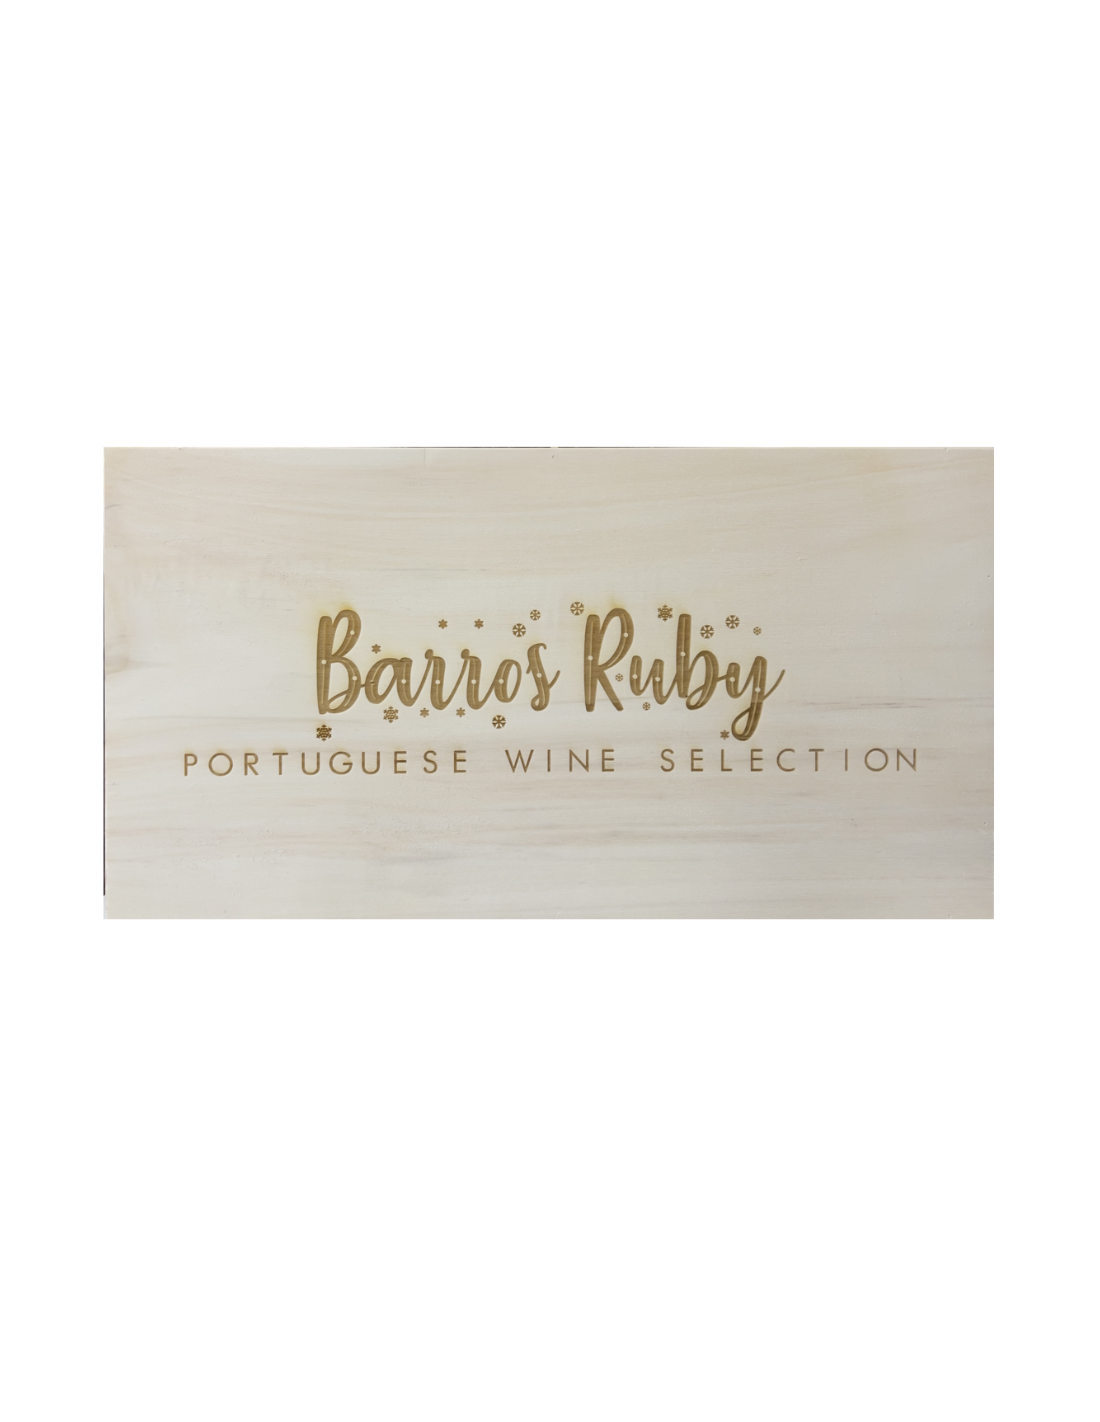 Pachet Barros Ruby Portuguese Wine Selection alcooldiscount.ro